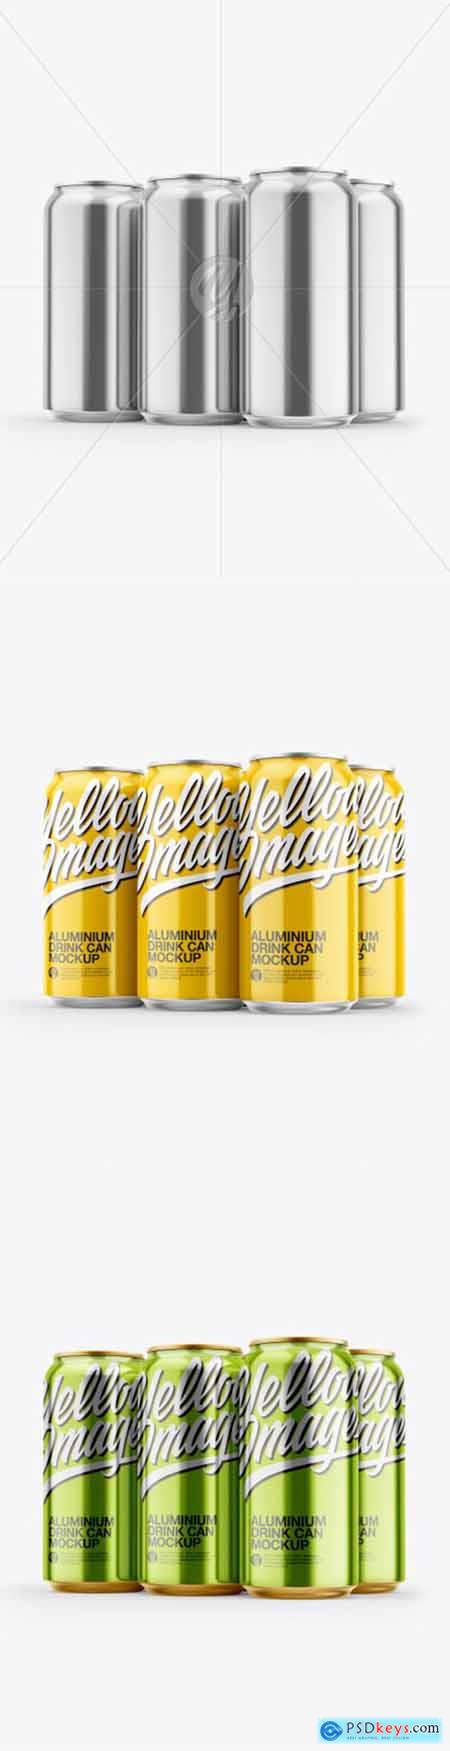 6 Pack Cans Mockup